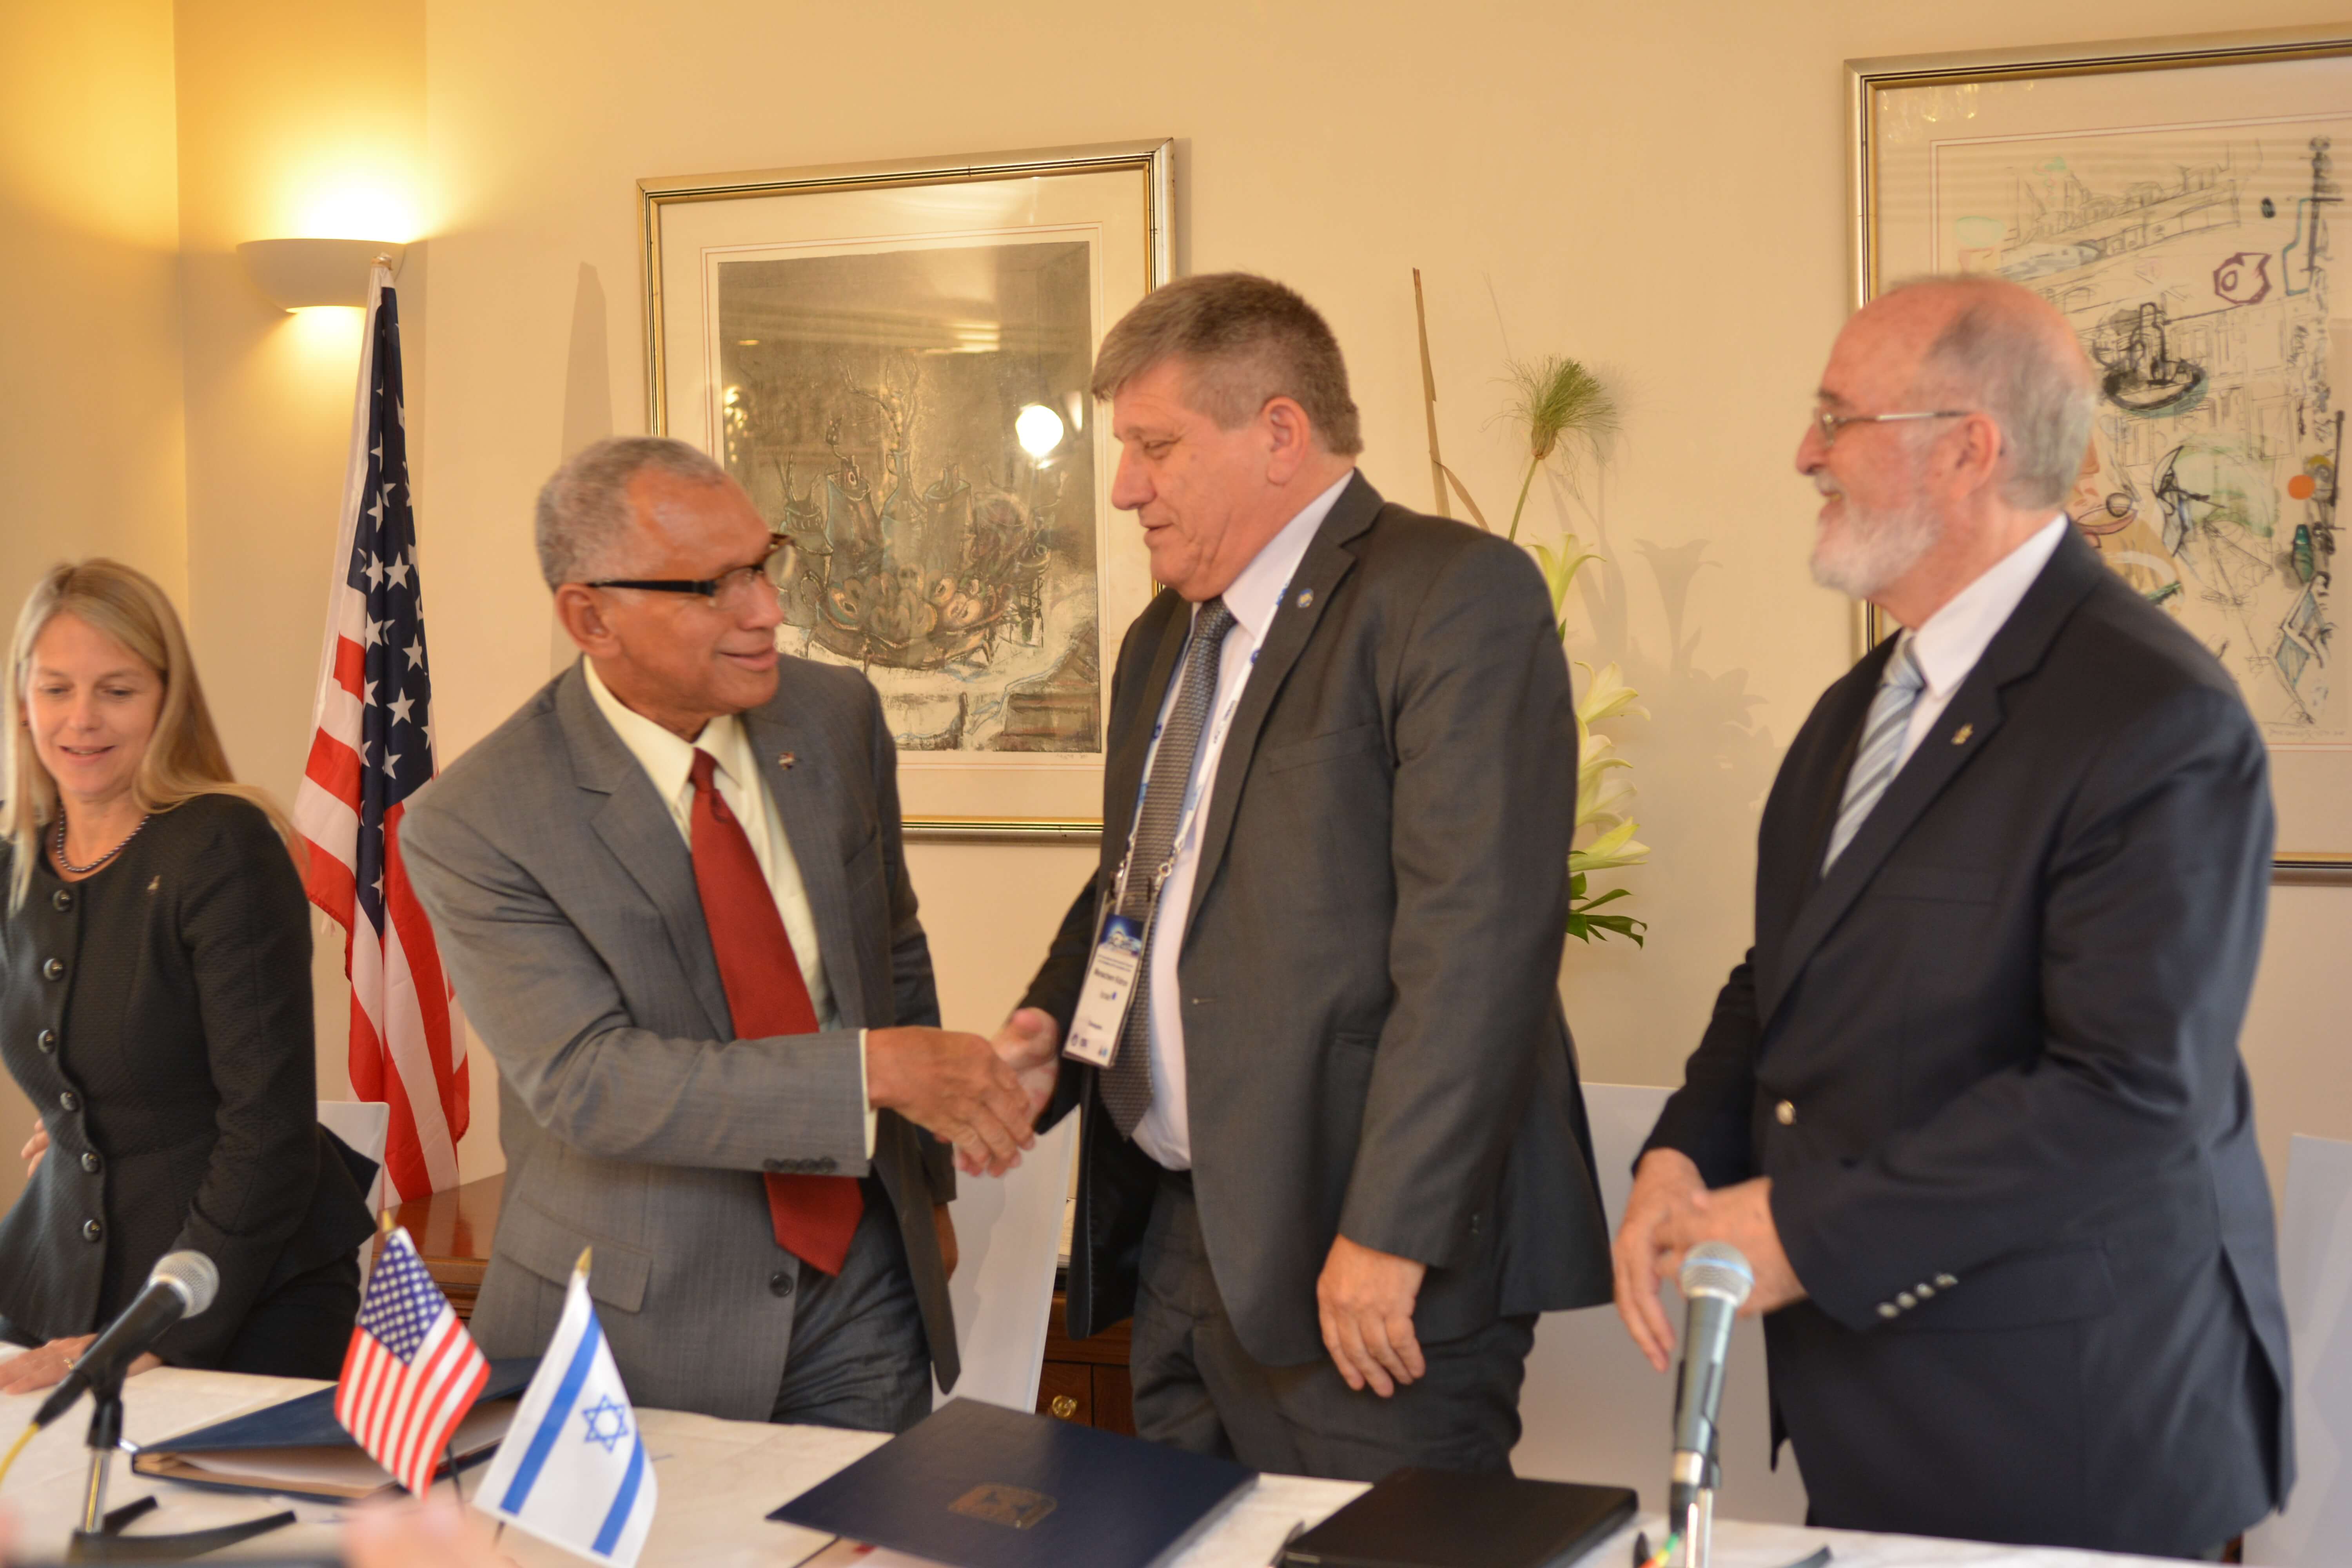 The signing of the ten-year agreement between the Israeli Space Agency and NASA during the World Federation of Astronautics Conference, Jerusalem, 13.10.15/XNUMX/XNUMX. Photo: Israel Ben-Eli, L.A.M.